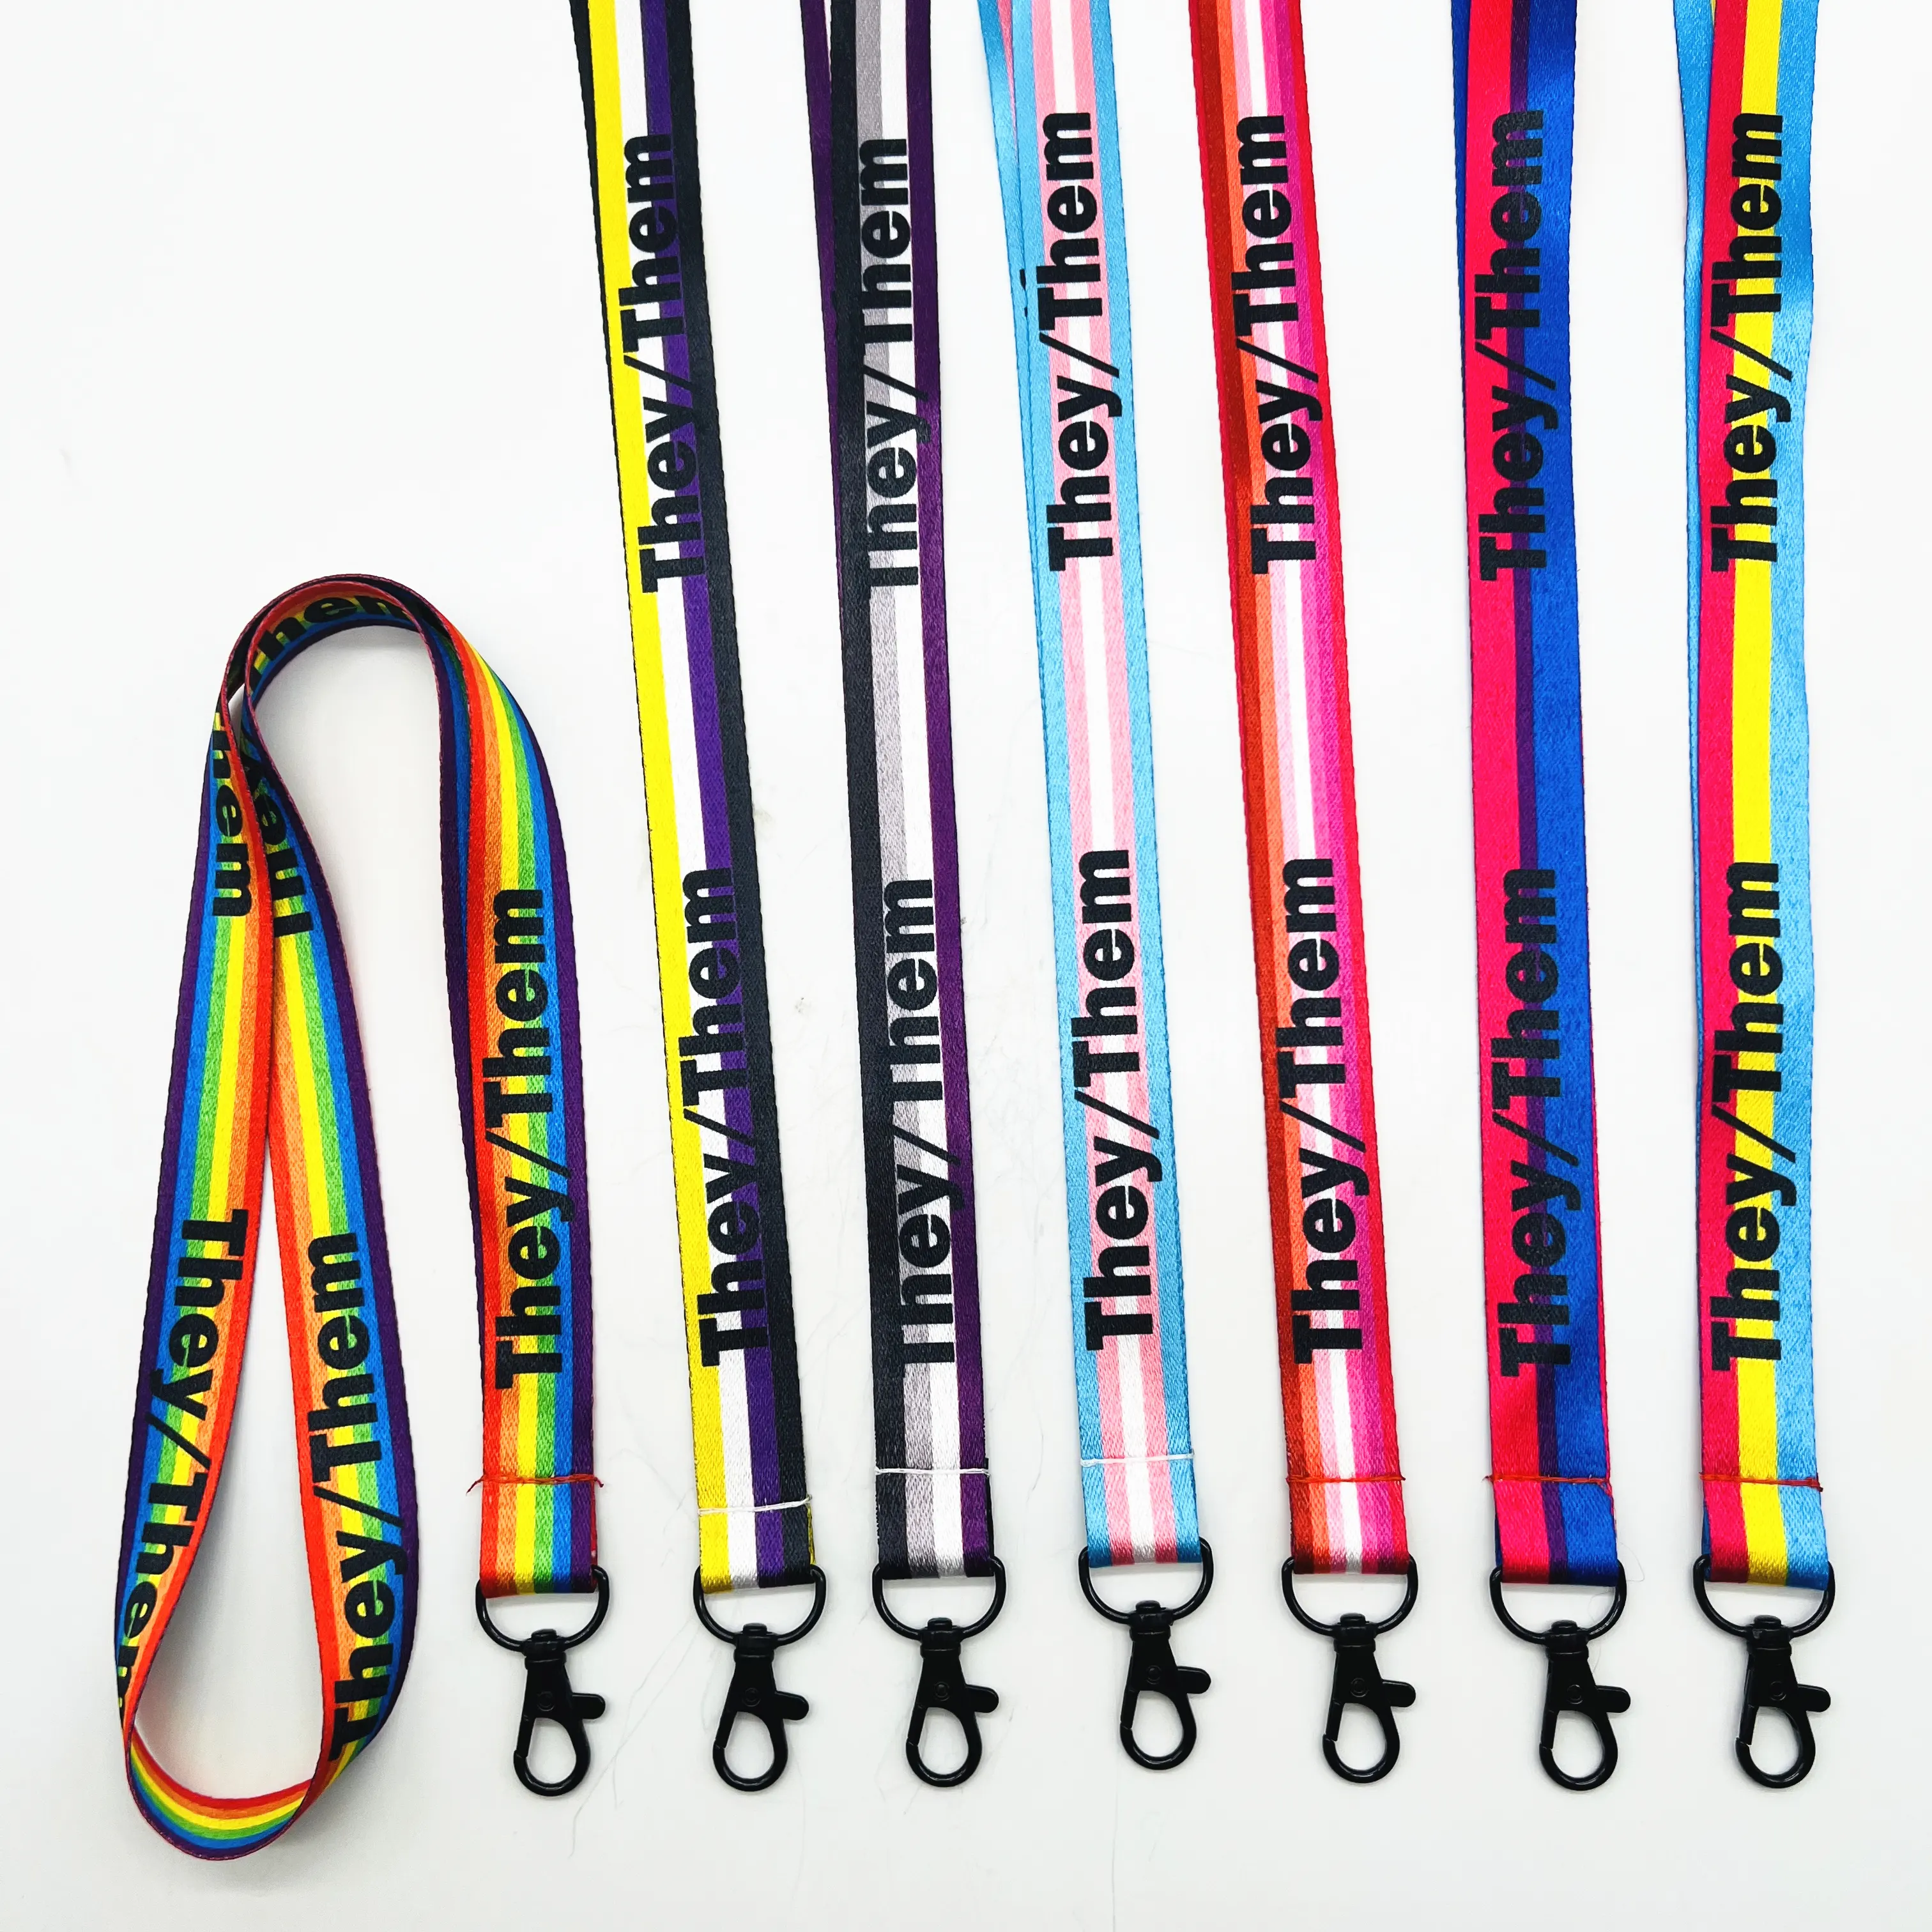 Full Color Printing Rainbow Pride Flag Lanyard Style Lanyards Keychains for LGBTQ Accessories Gay Pride Stuff and Gift-Giving